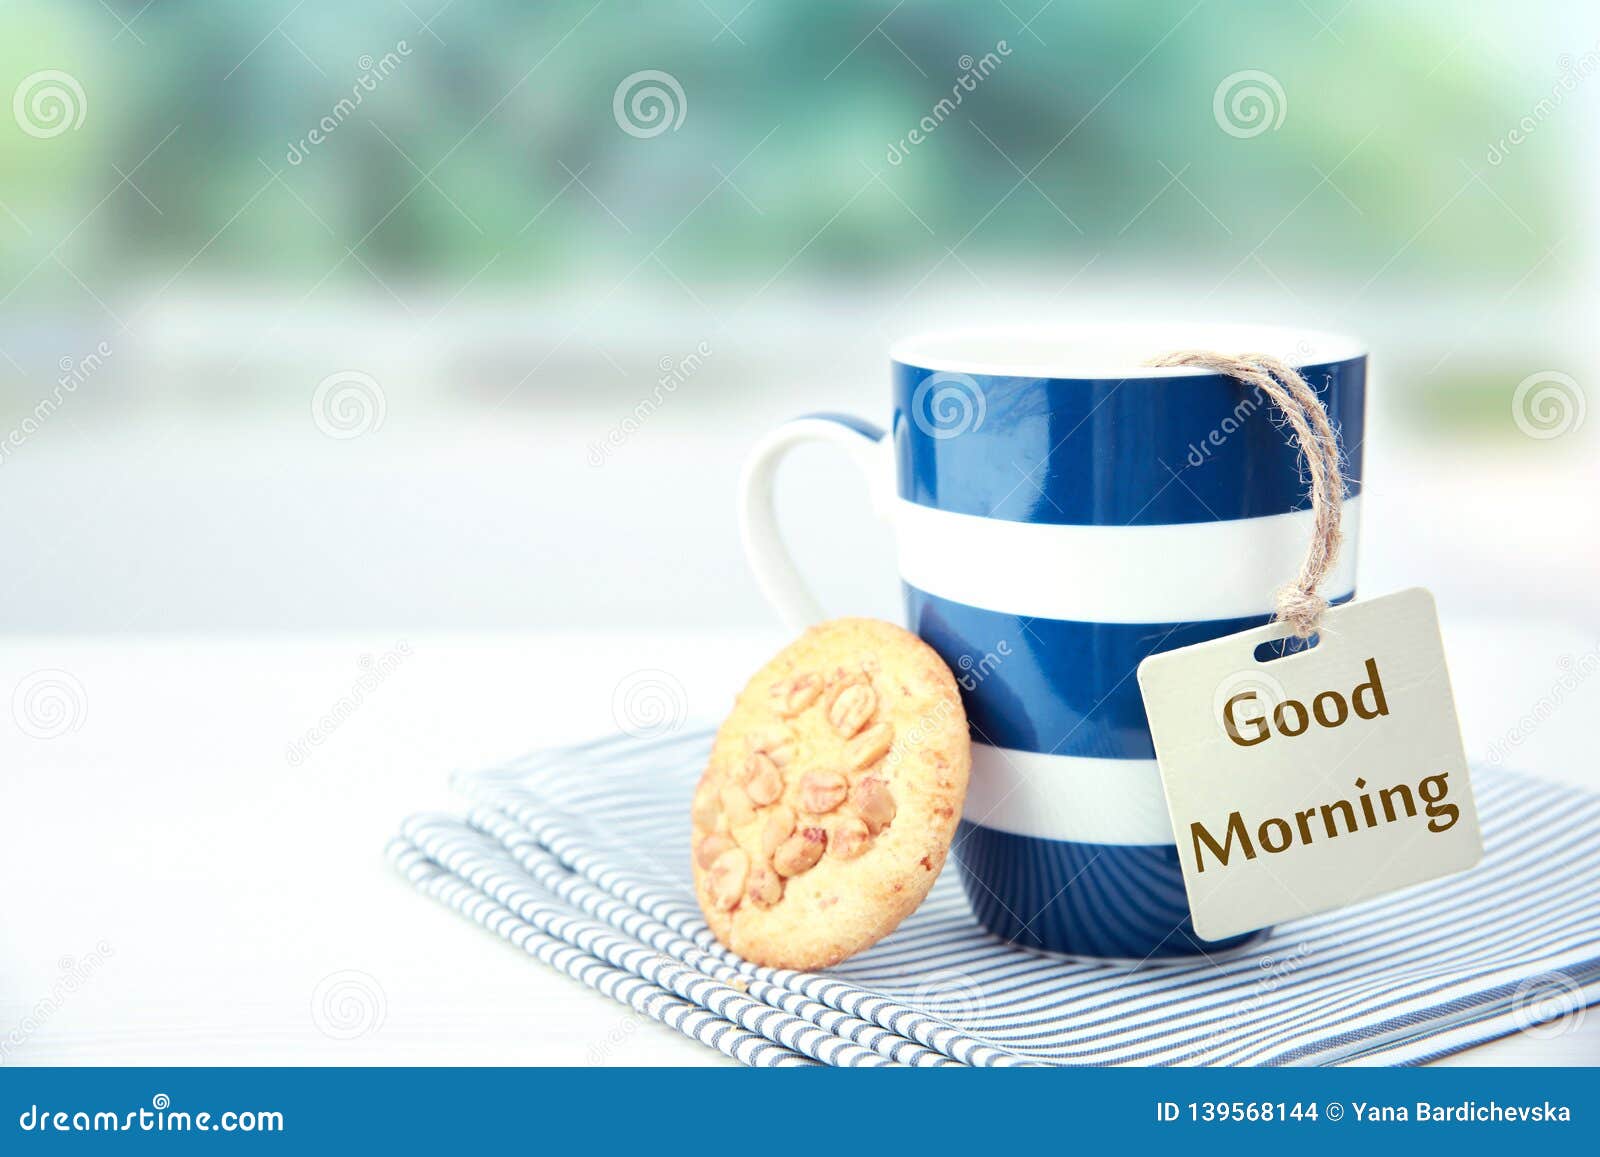 Good Morning Breakfast Concept.Mug with Cookie Stock Photo - Image ...